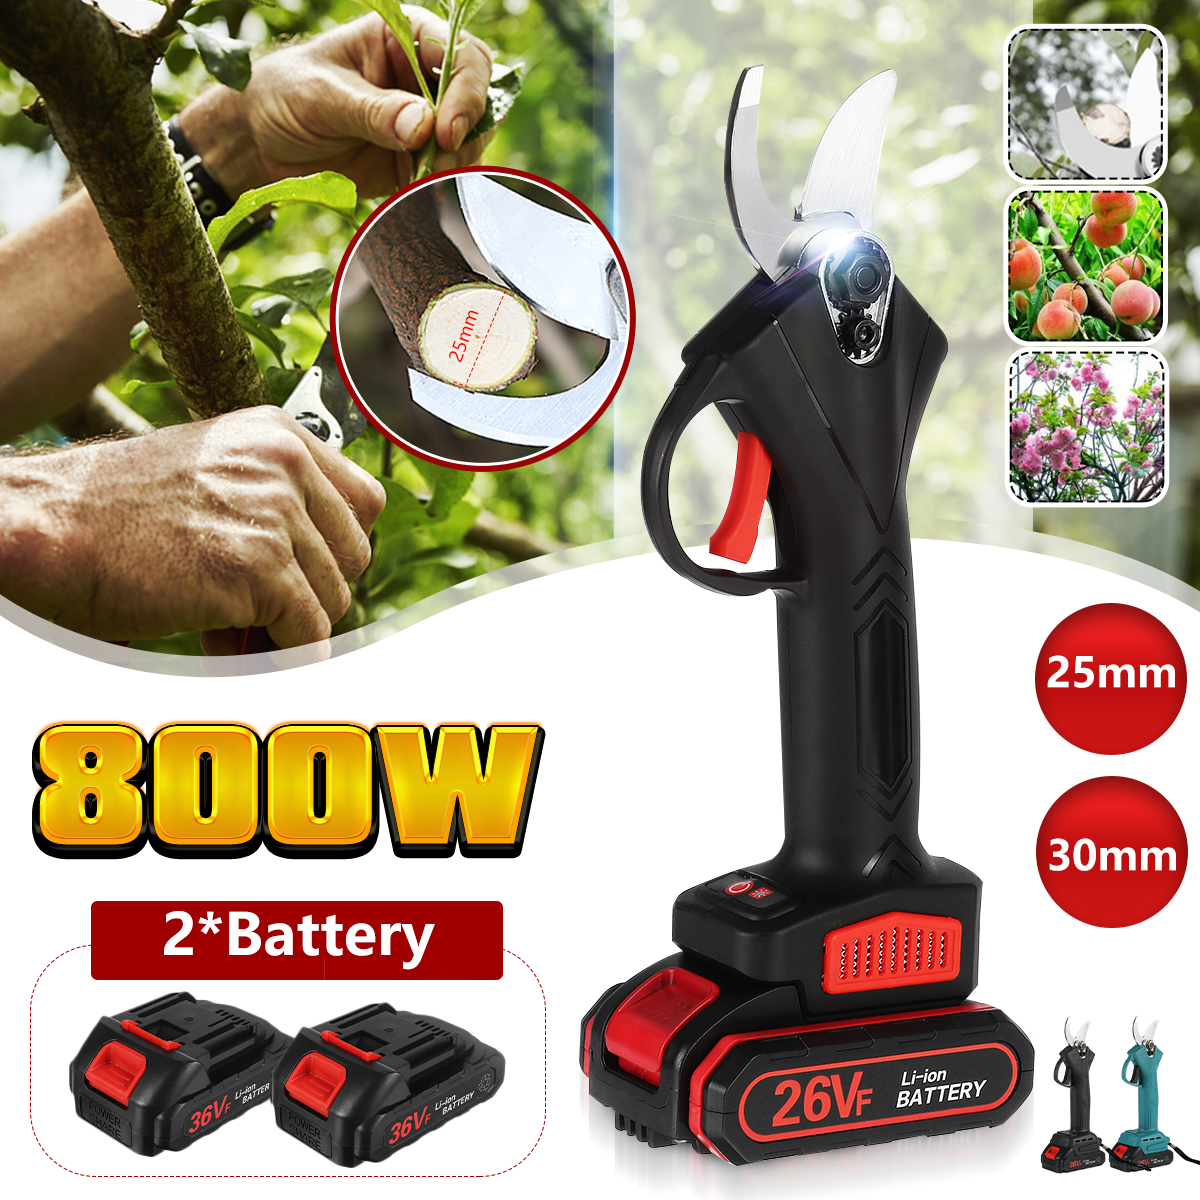 2530mm-Cordless-Electric-Branch-Scissors-Pruning-Shears-Cutter-Tool-Trimmer-W-2pcs-Battery-1814642-2